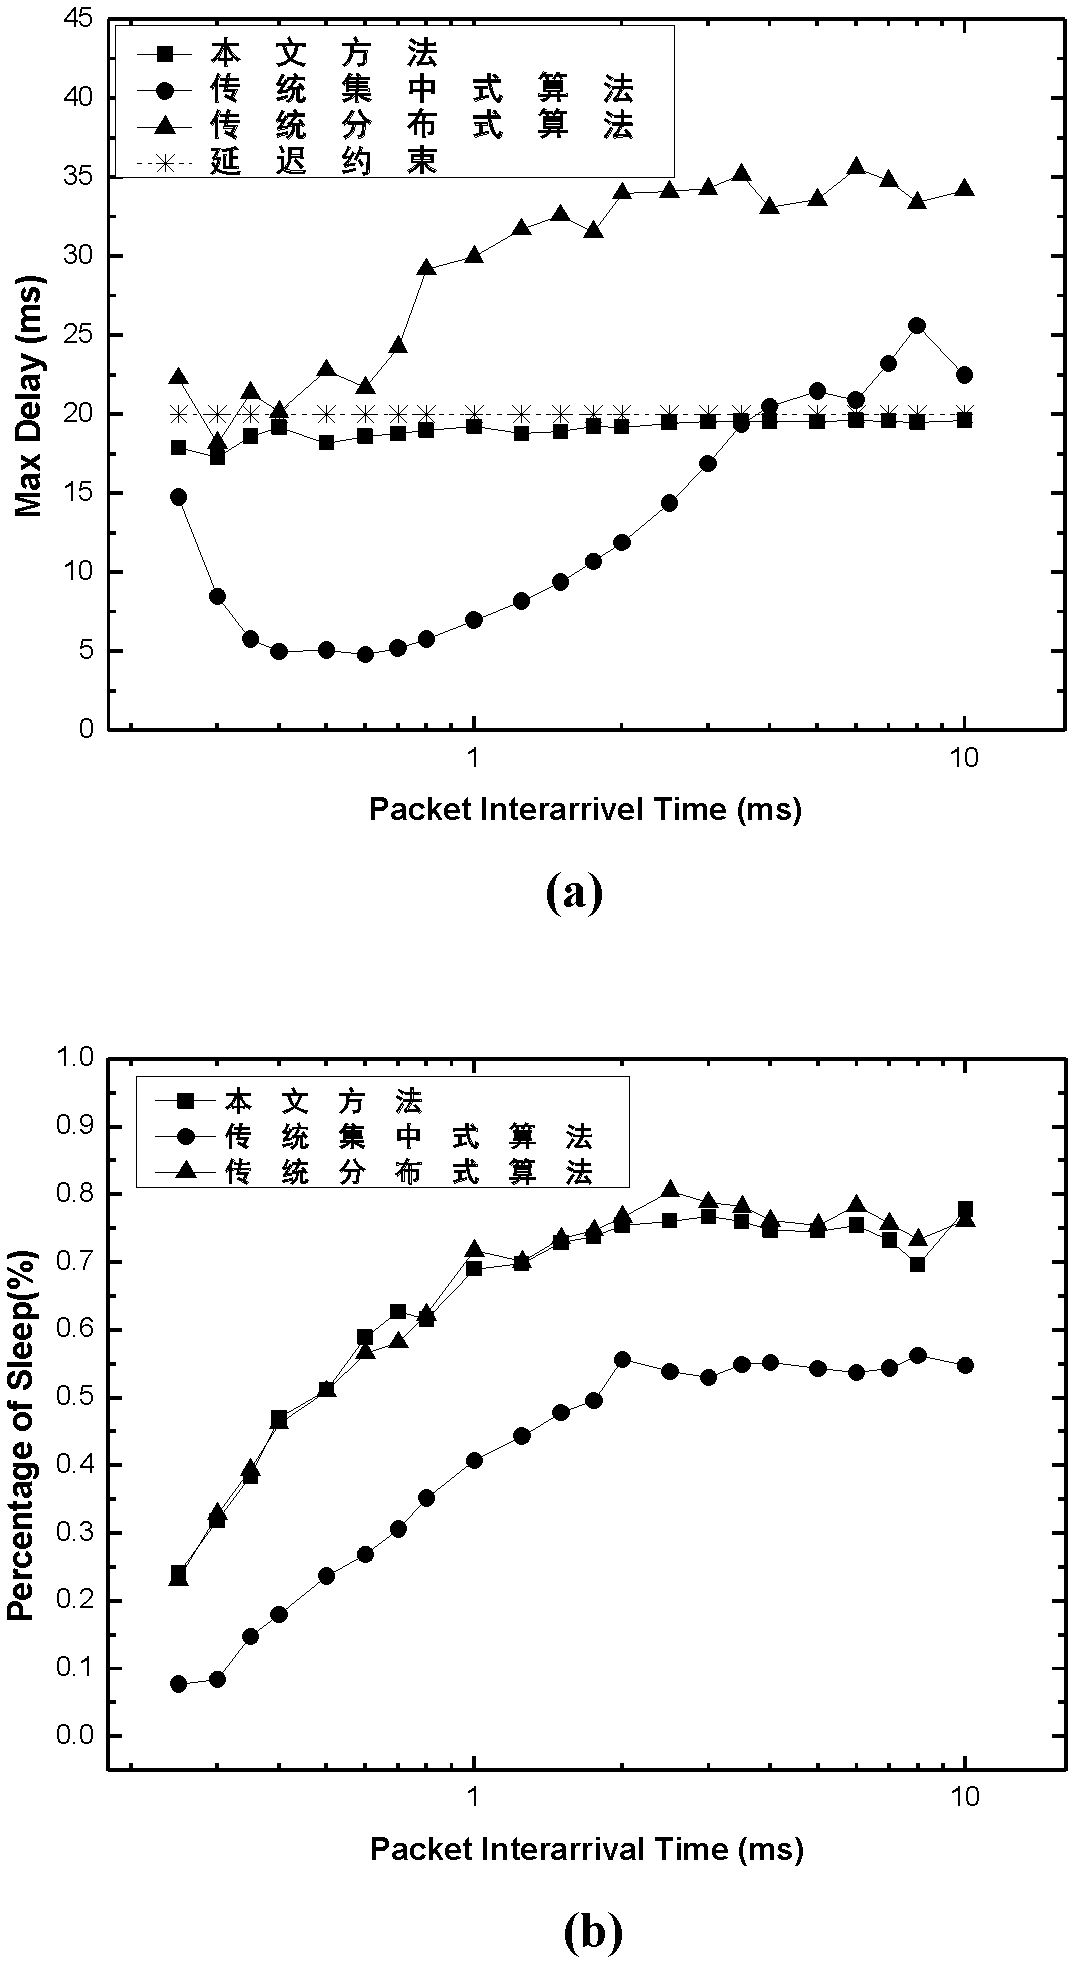 Awakening mechanism for sleeping nodes in network containing inaccurate state information